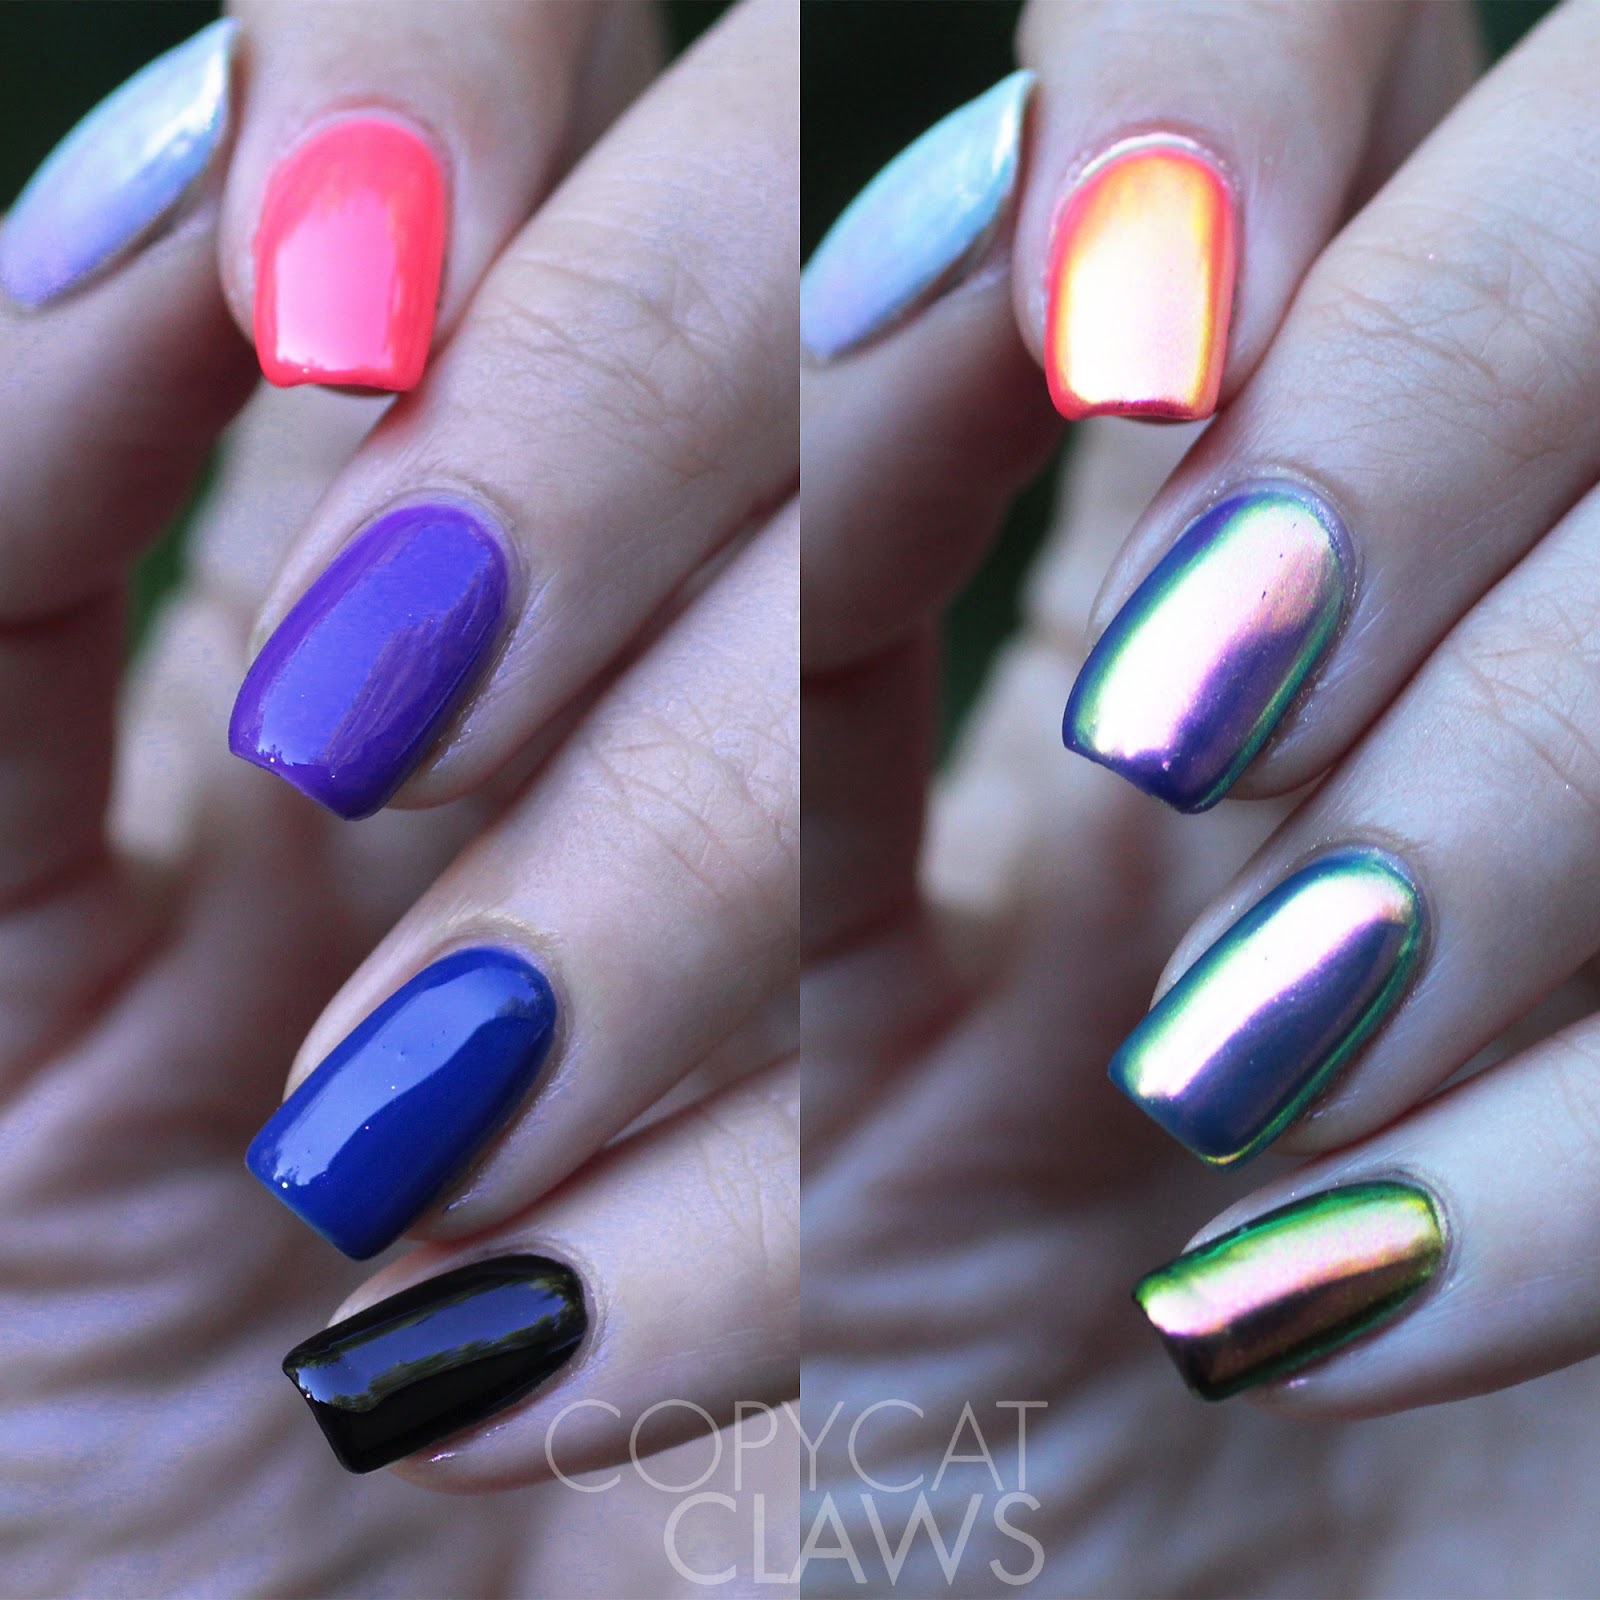 Copycat Claws: Whats Up Nails Aurora Pigment Review